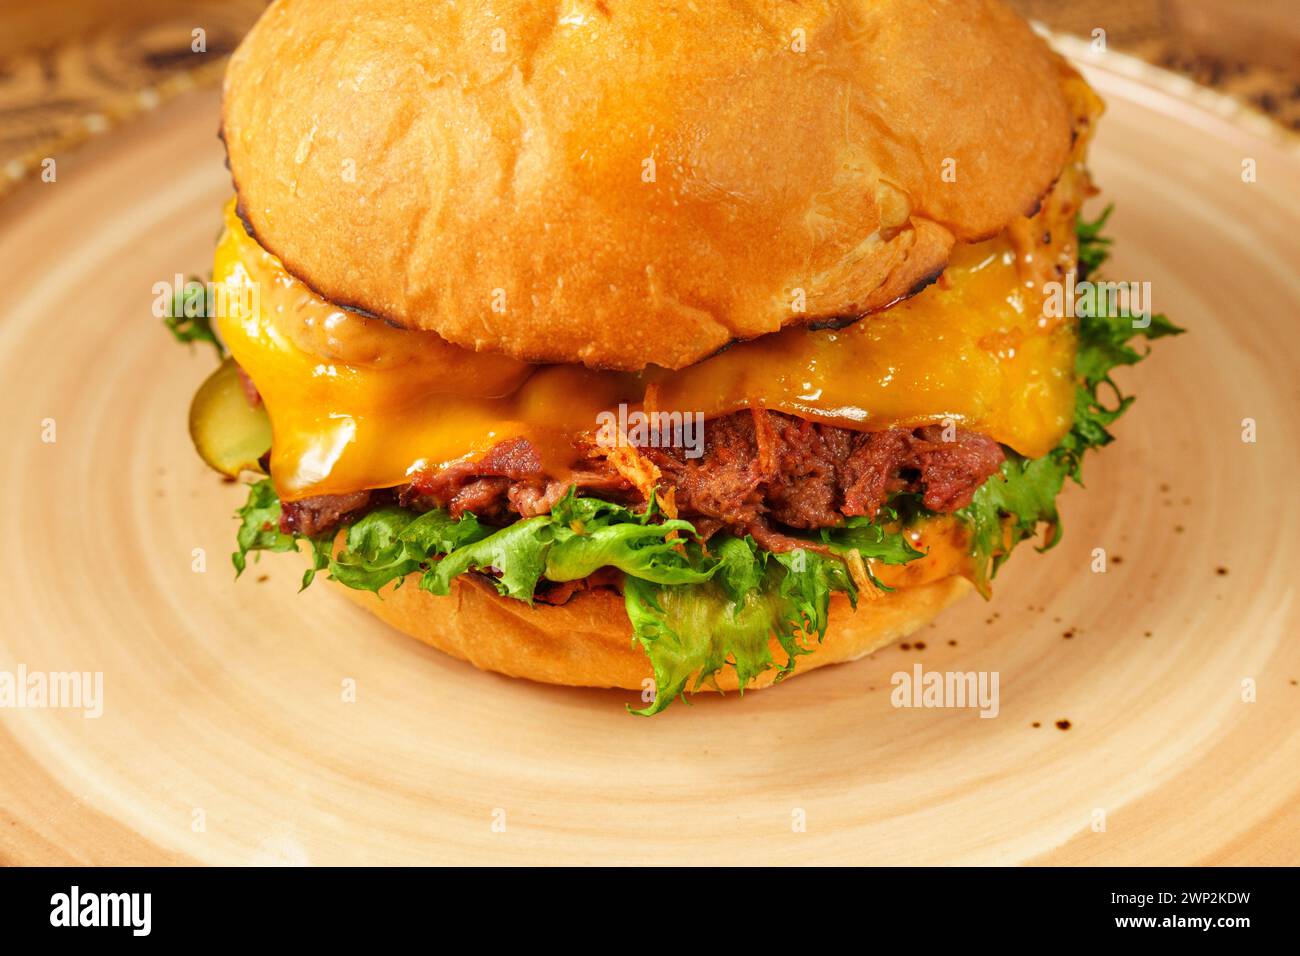 Delicious Cheeseburger With Lettuce and Toppings on Plate Stock Photo